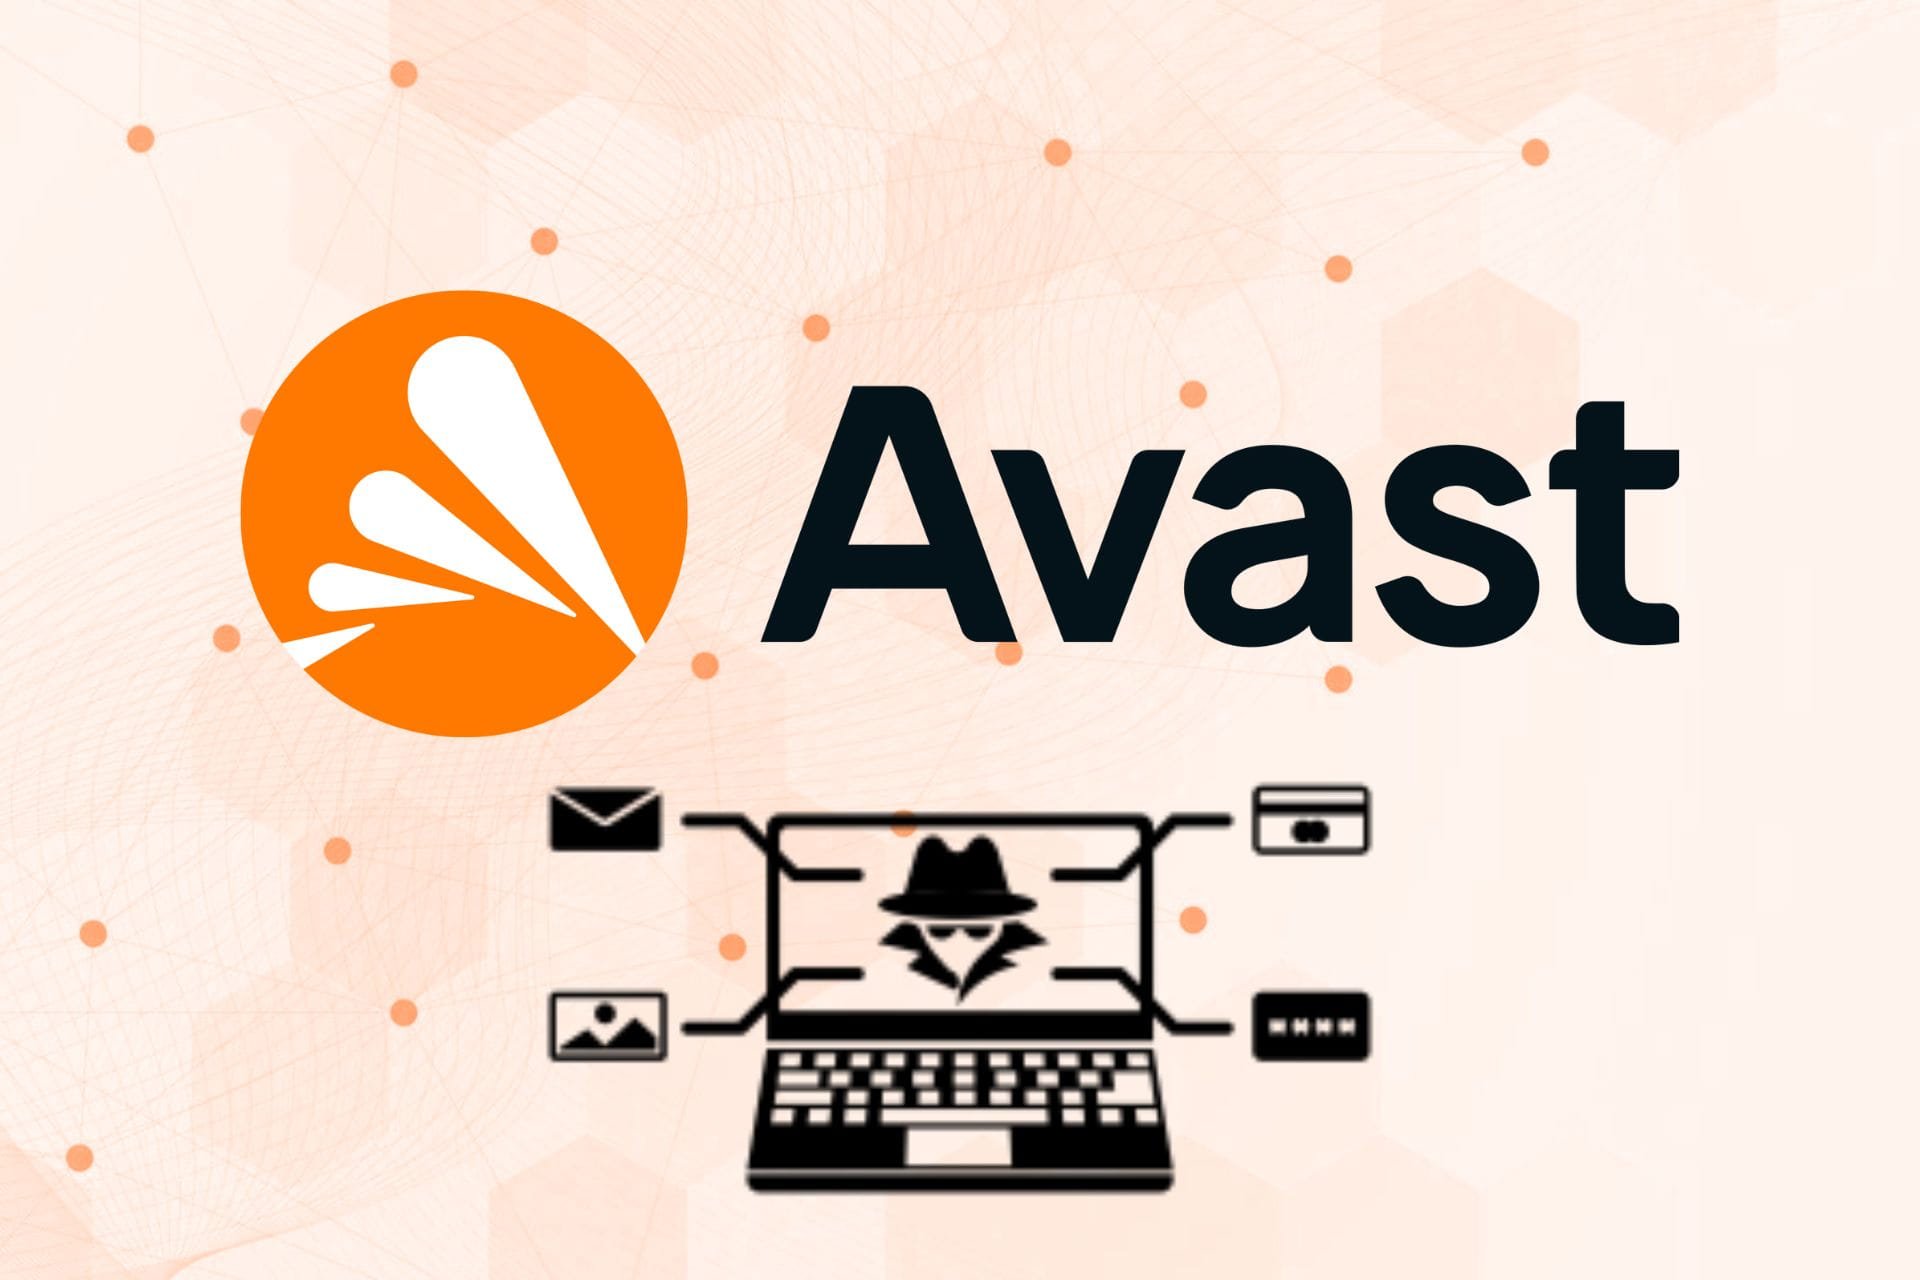 Avast sells your browsing data for advertising without consent